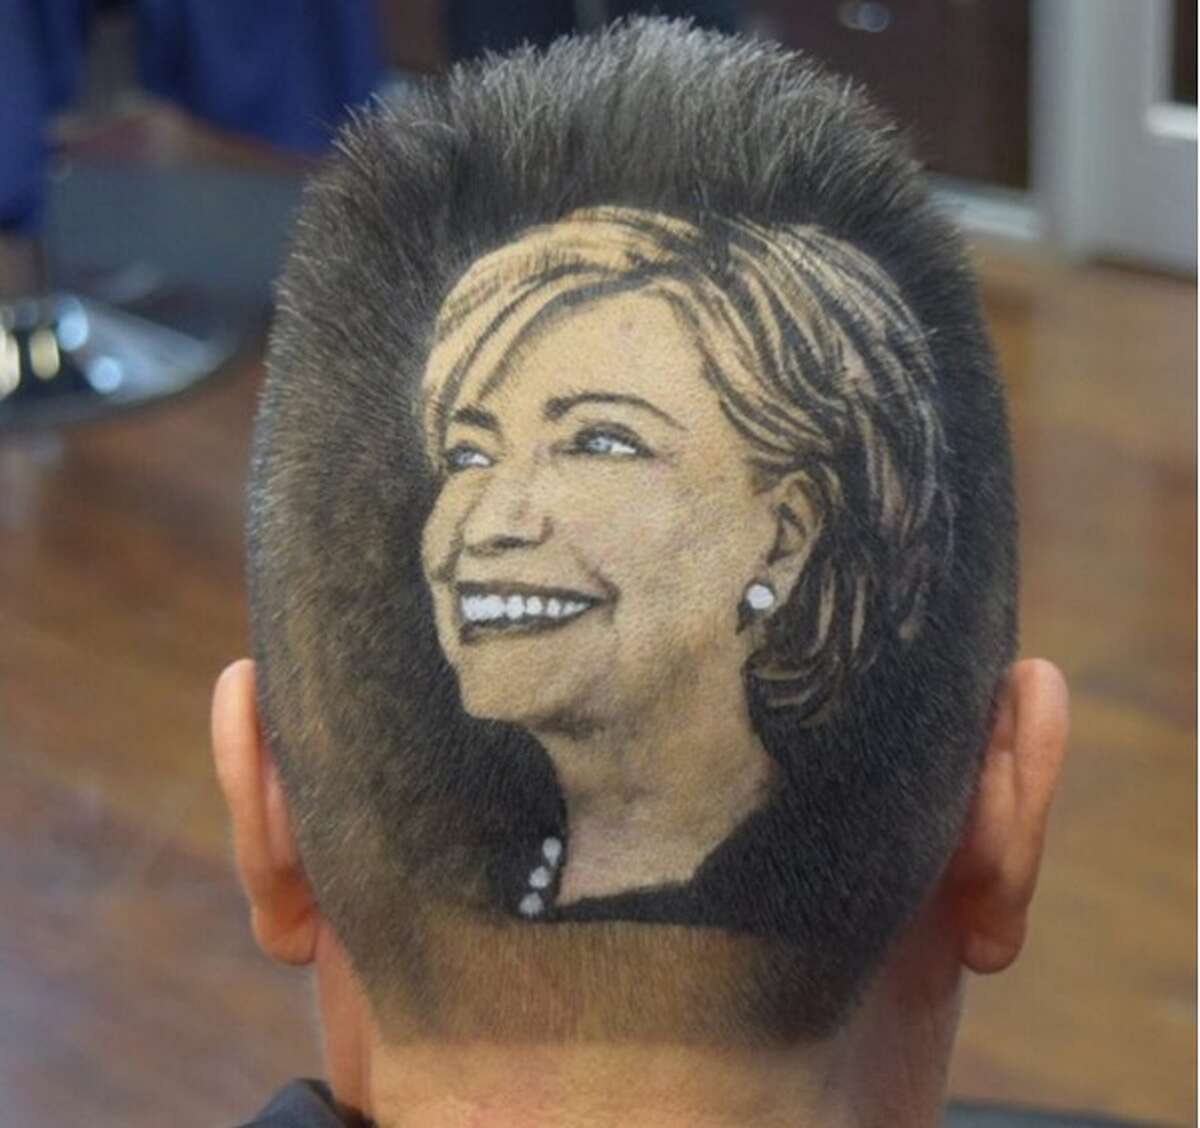 Hillary Clinton's face was shaved into the back of this San Antonian by Rob the Original on October 14, 2015.